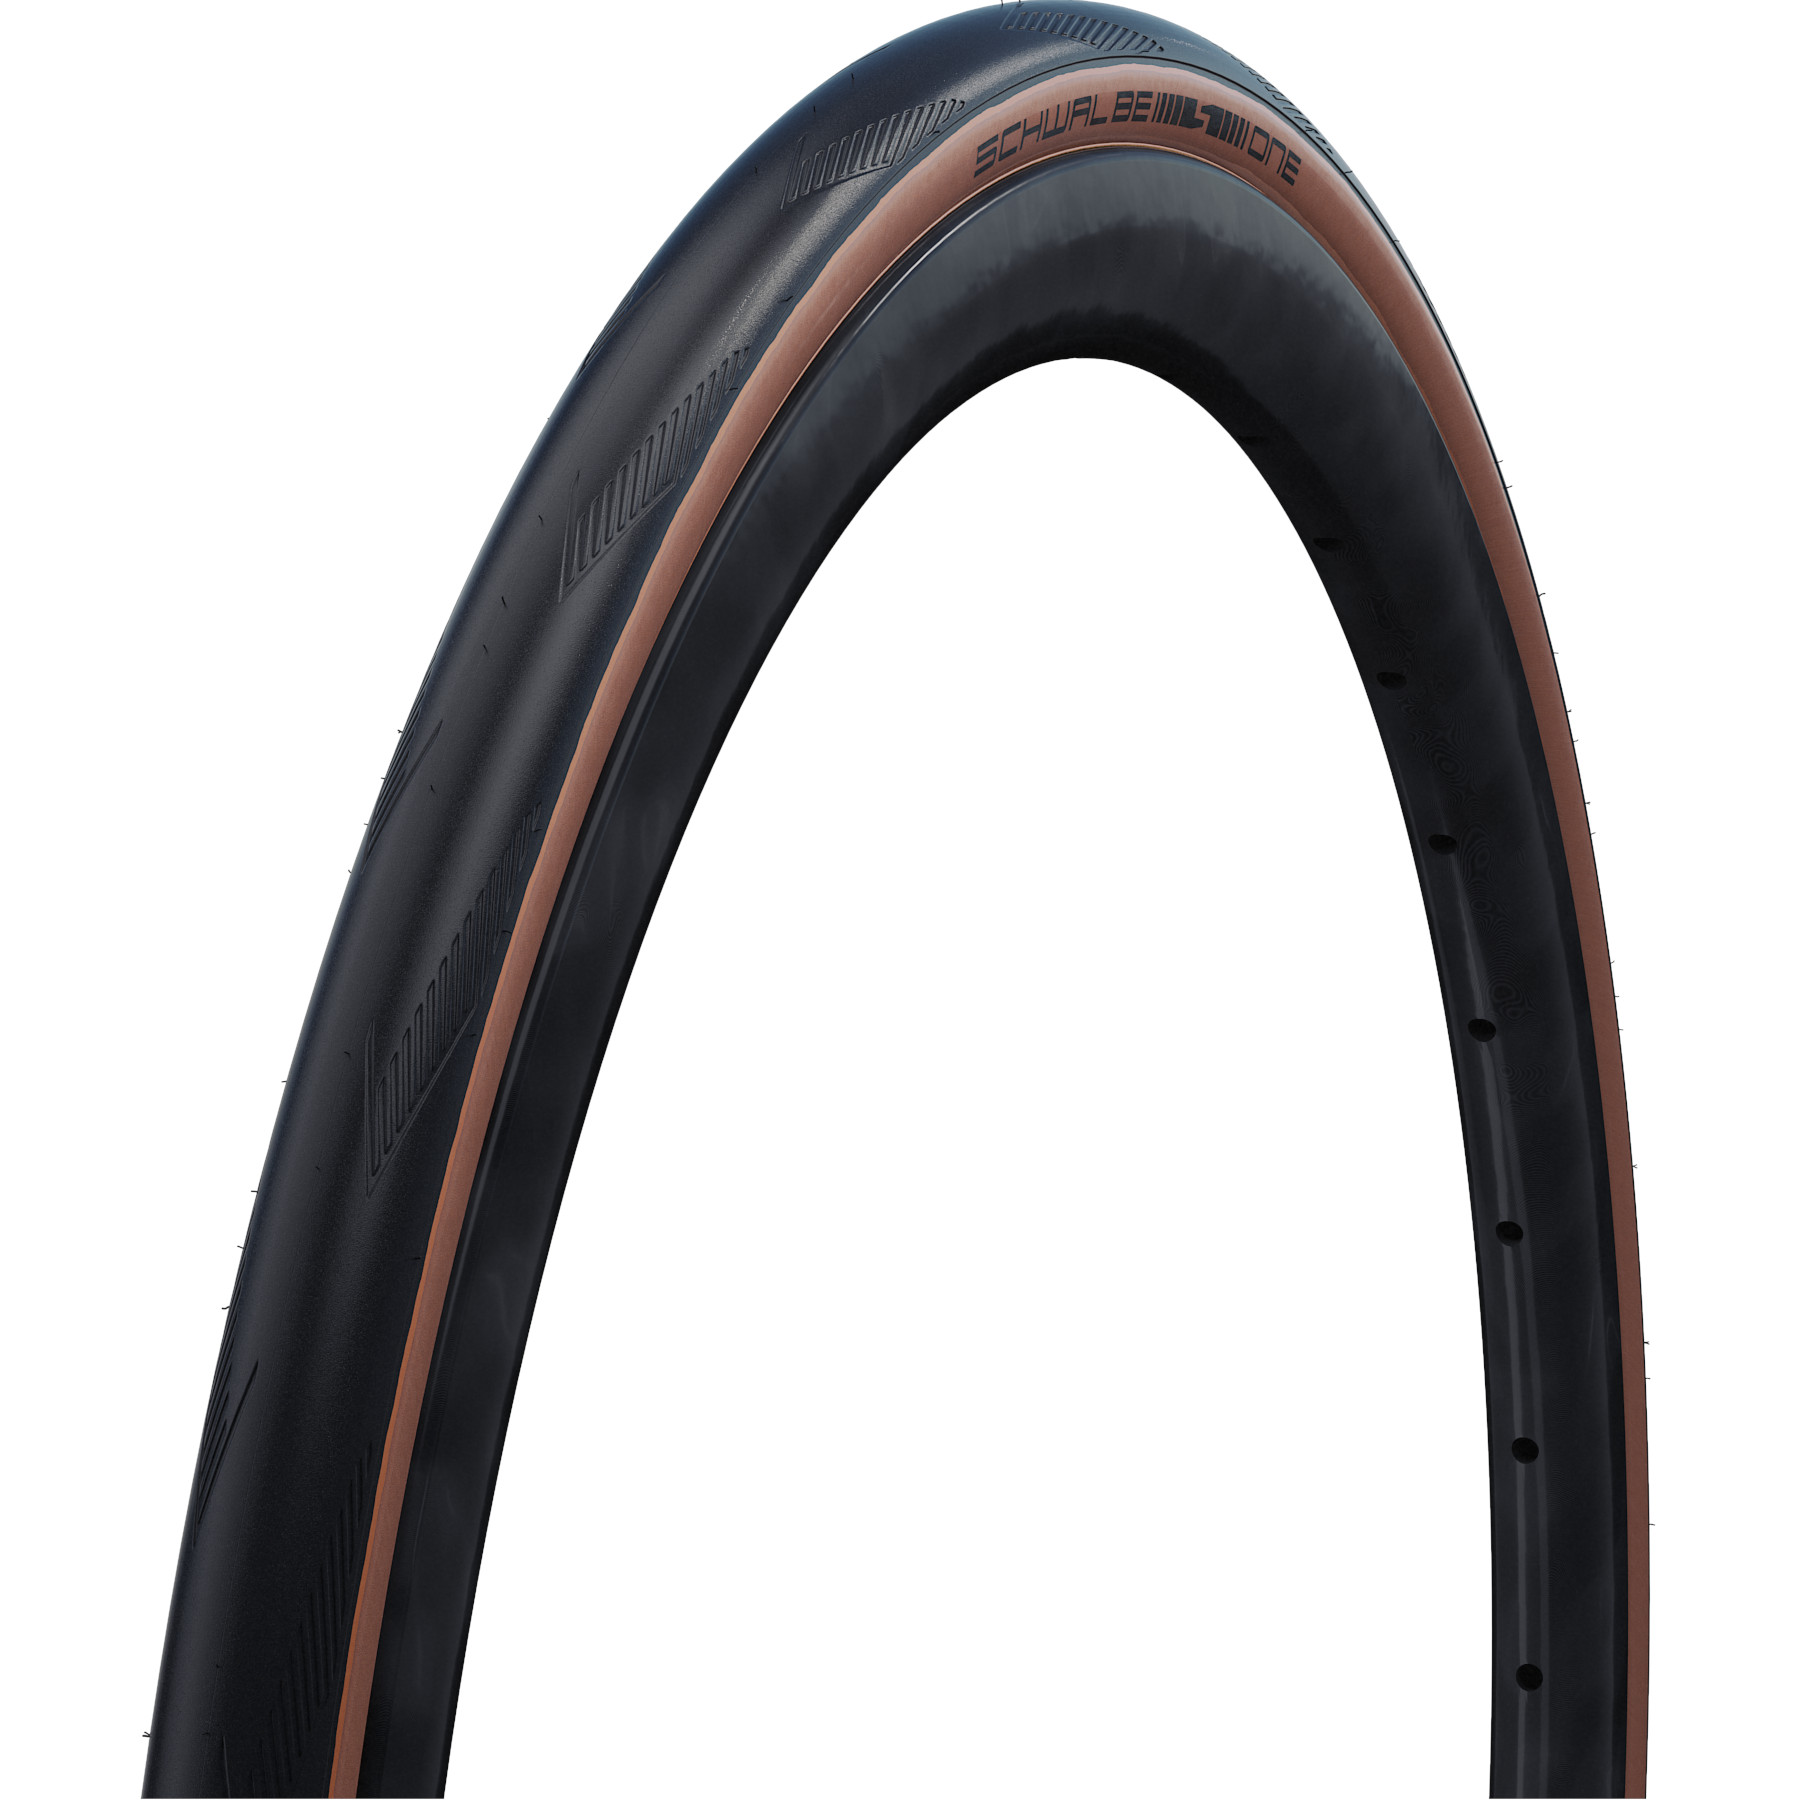 Picture of Schwalbe One Folding Tire - Performance | Addix | Race Guard | TLEasy - E-25 - 28-622 | Bronze Sidewall